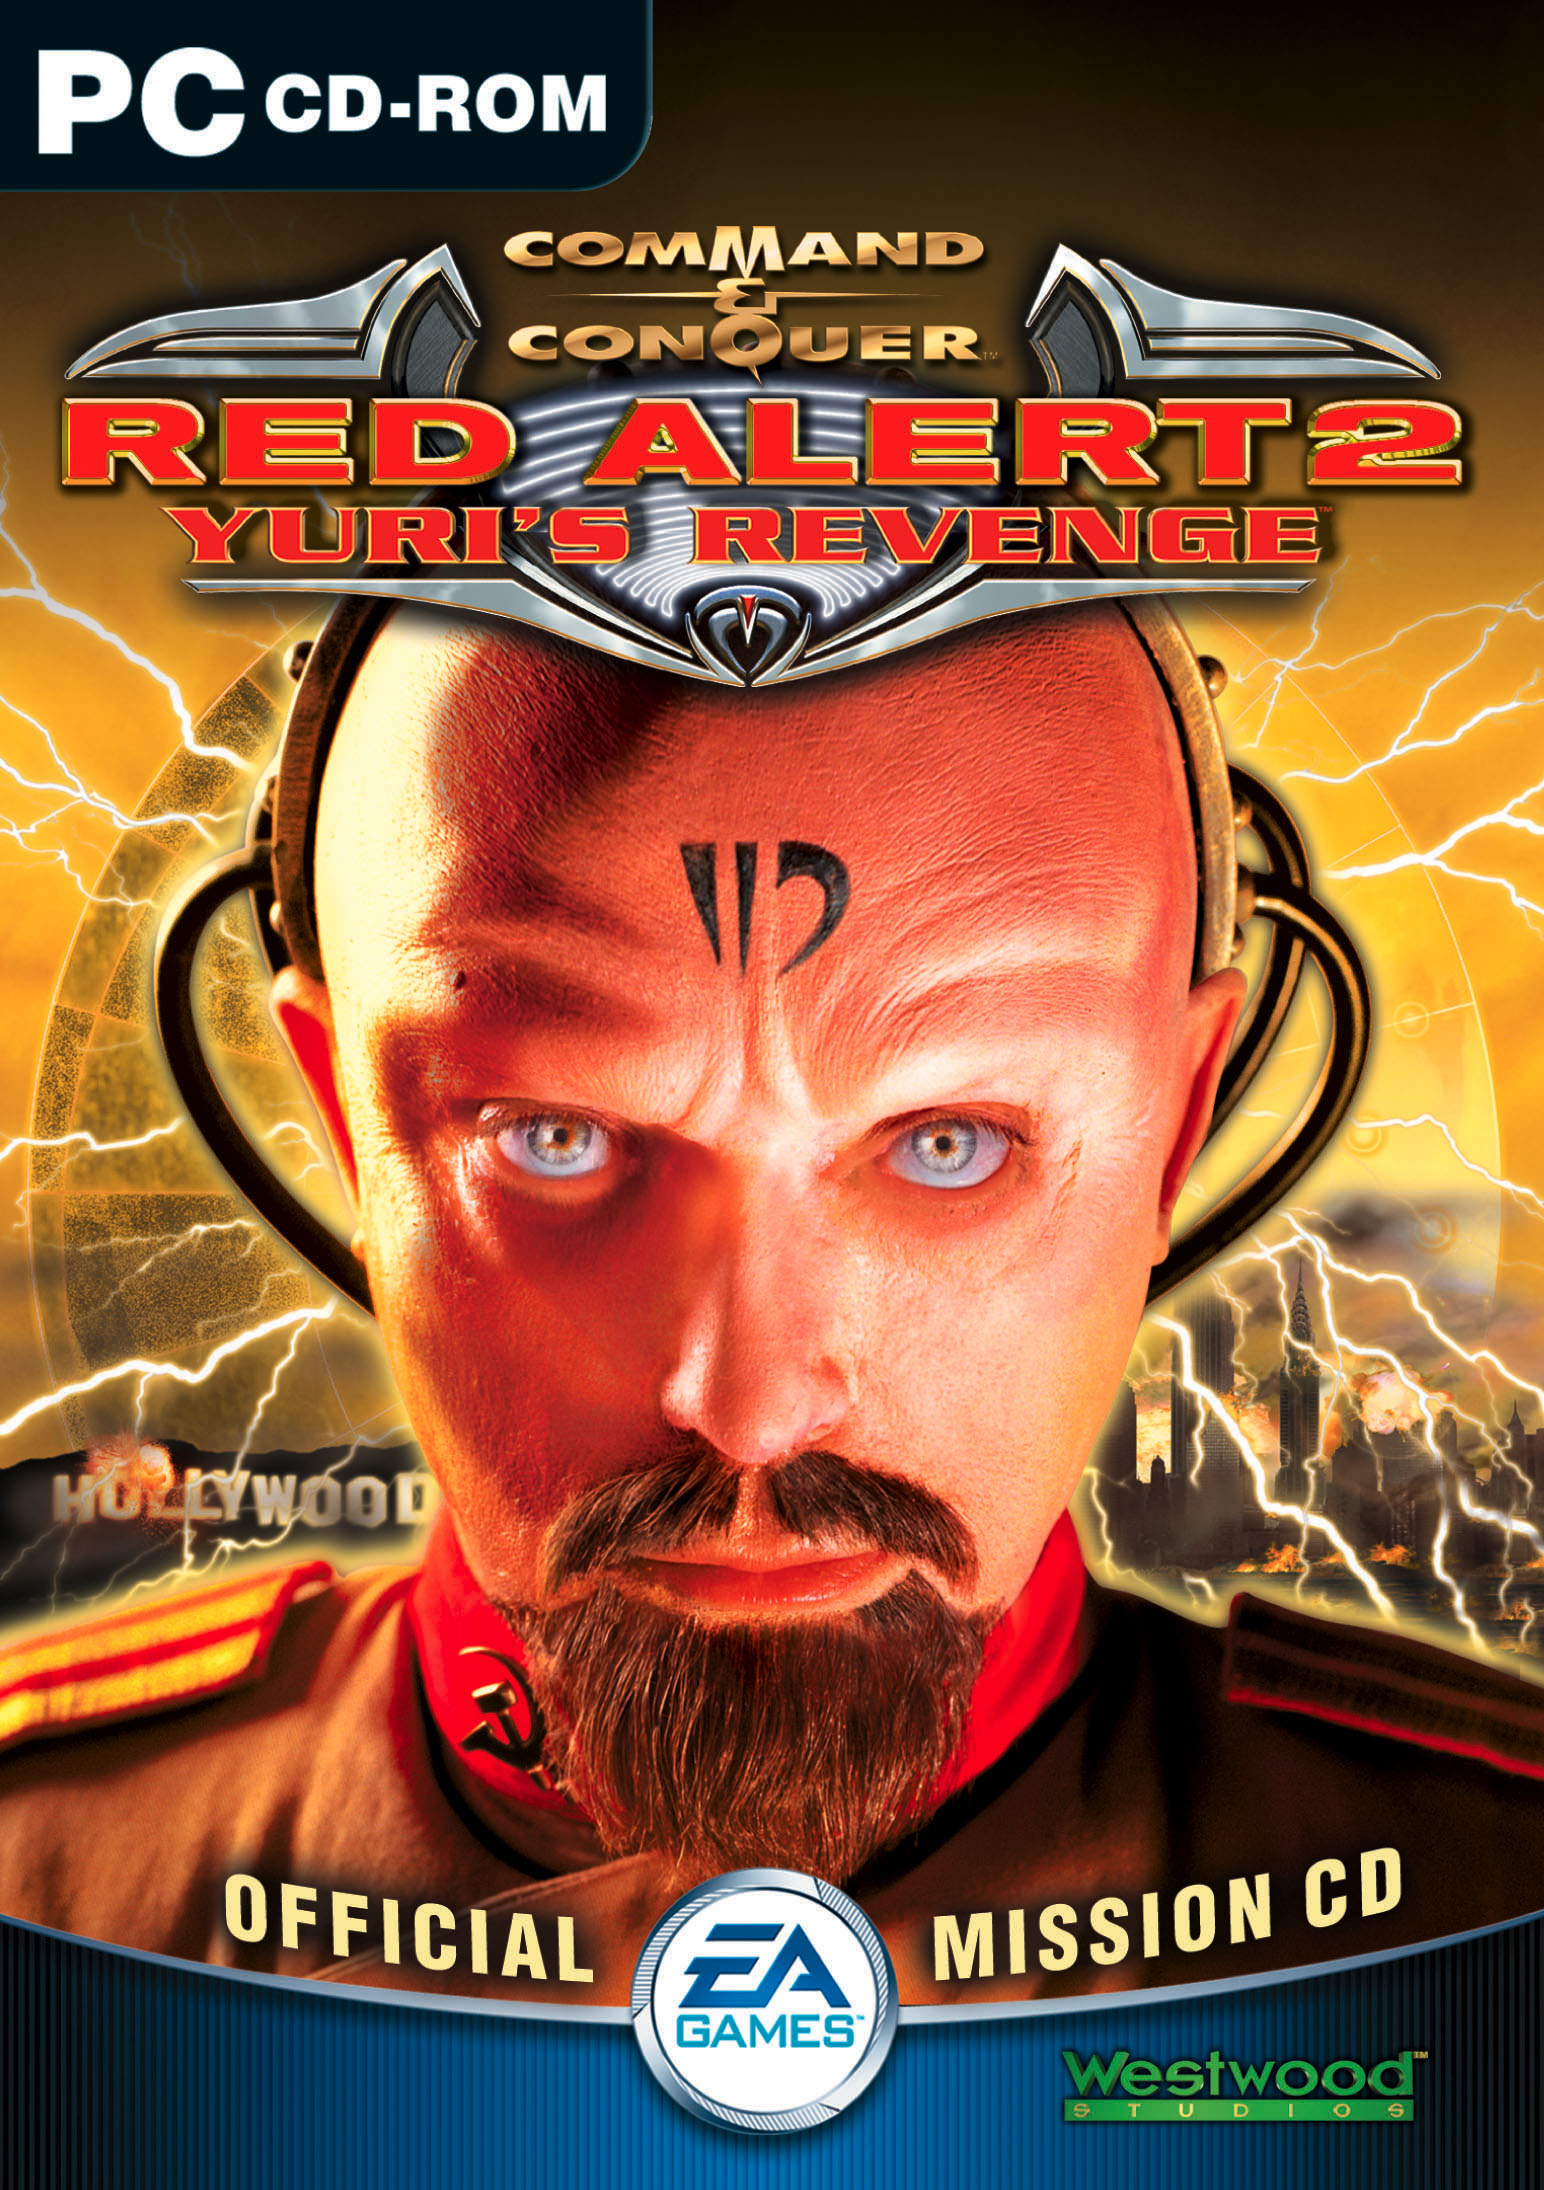 & Conquer: Red Alert - Yuri's Revenge - Command & Conquer Wiki - covering Tiberium, Red Alert and Generals universes